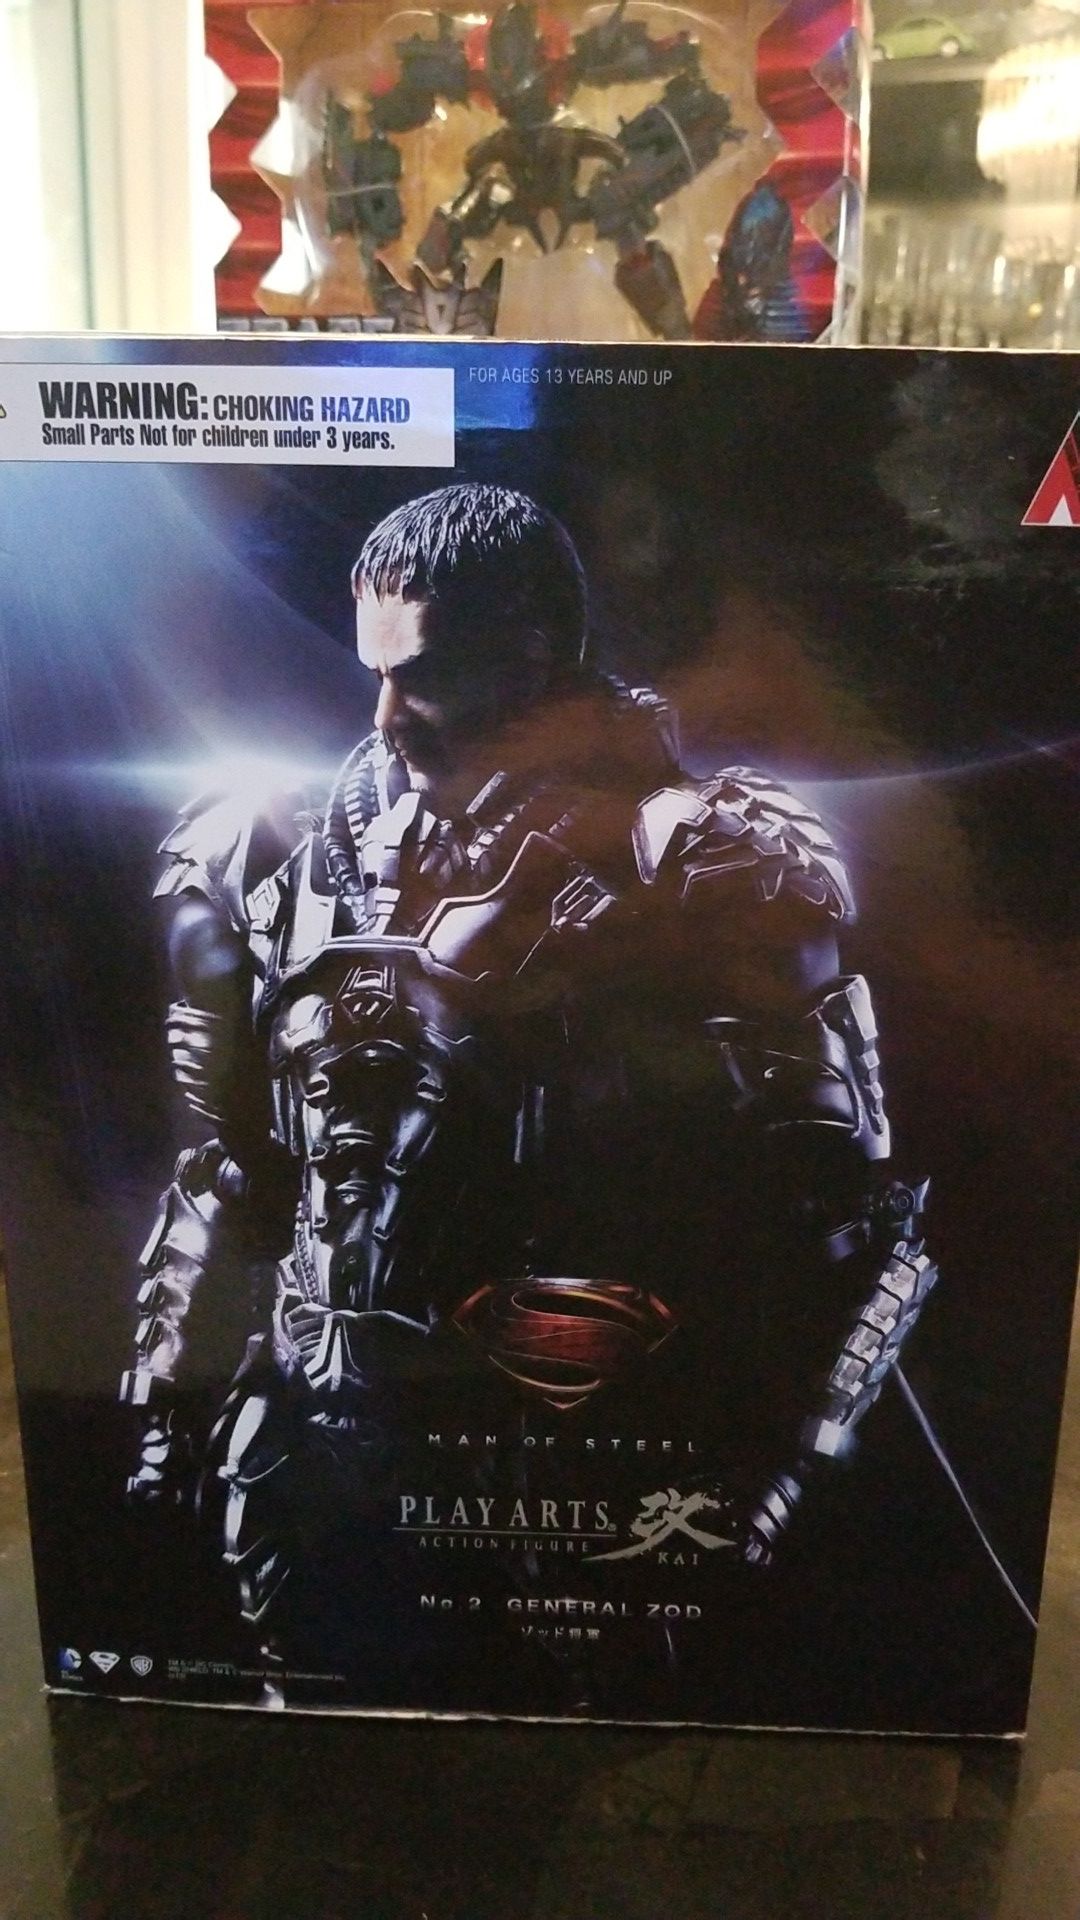 PLAY ARTS KAI General Zod unopened New Superman DC